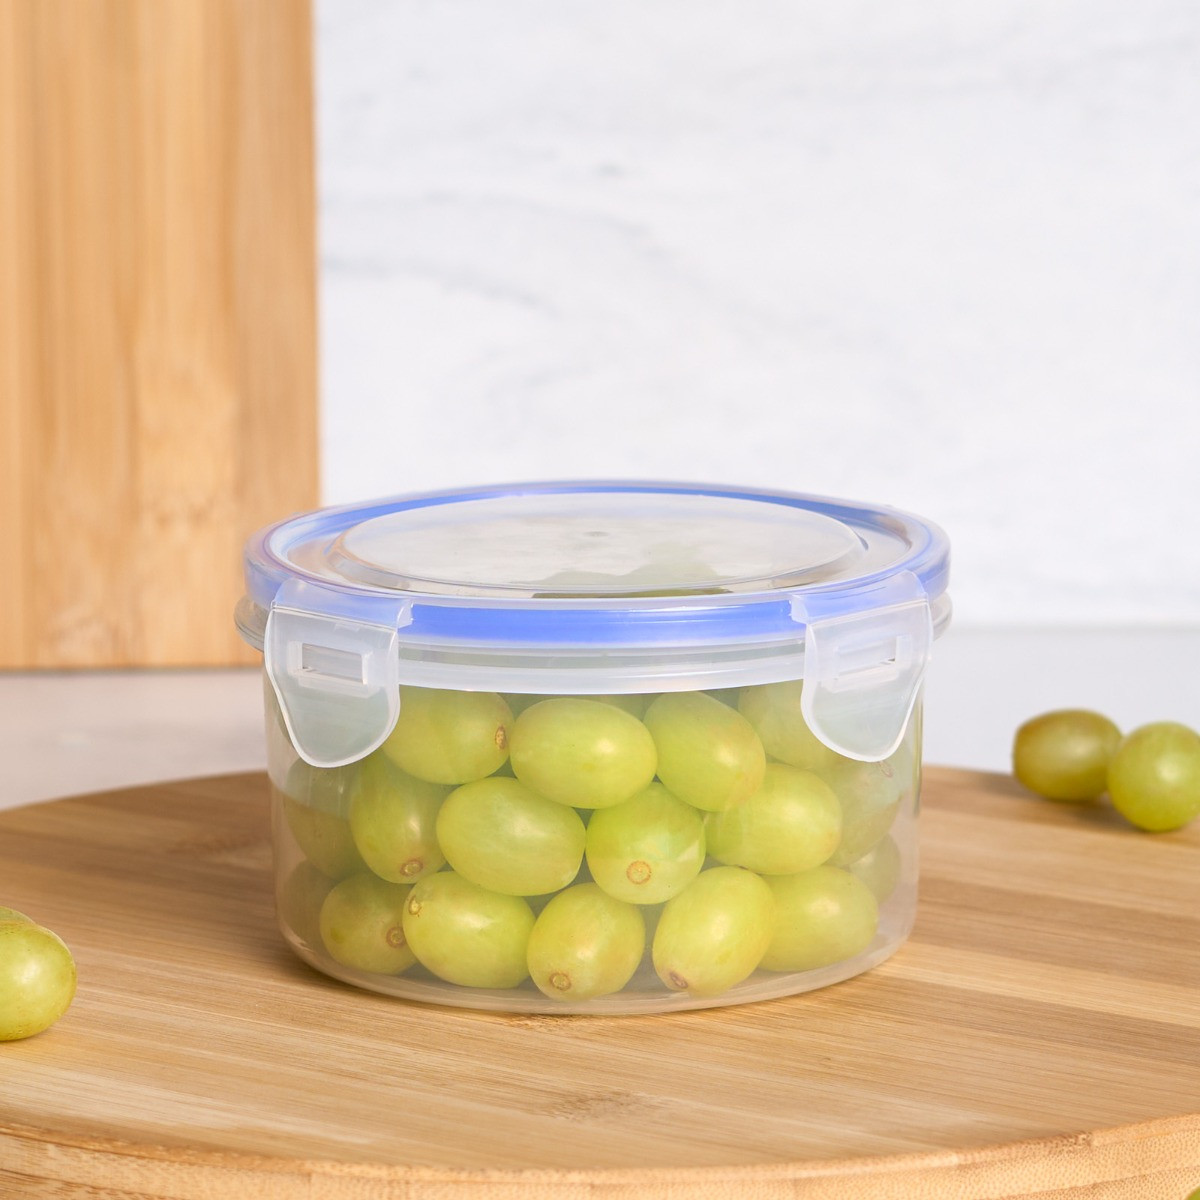  OHS Round Plastic Tupperware Set, 3 Piece - Clear>